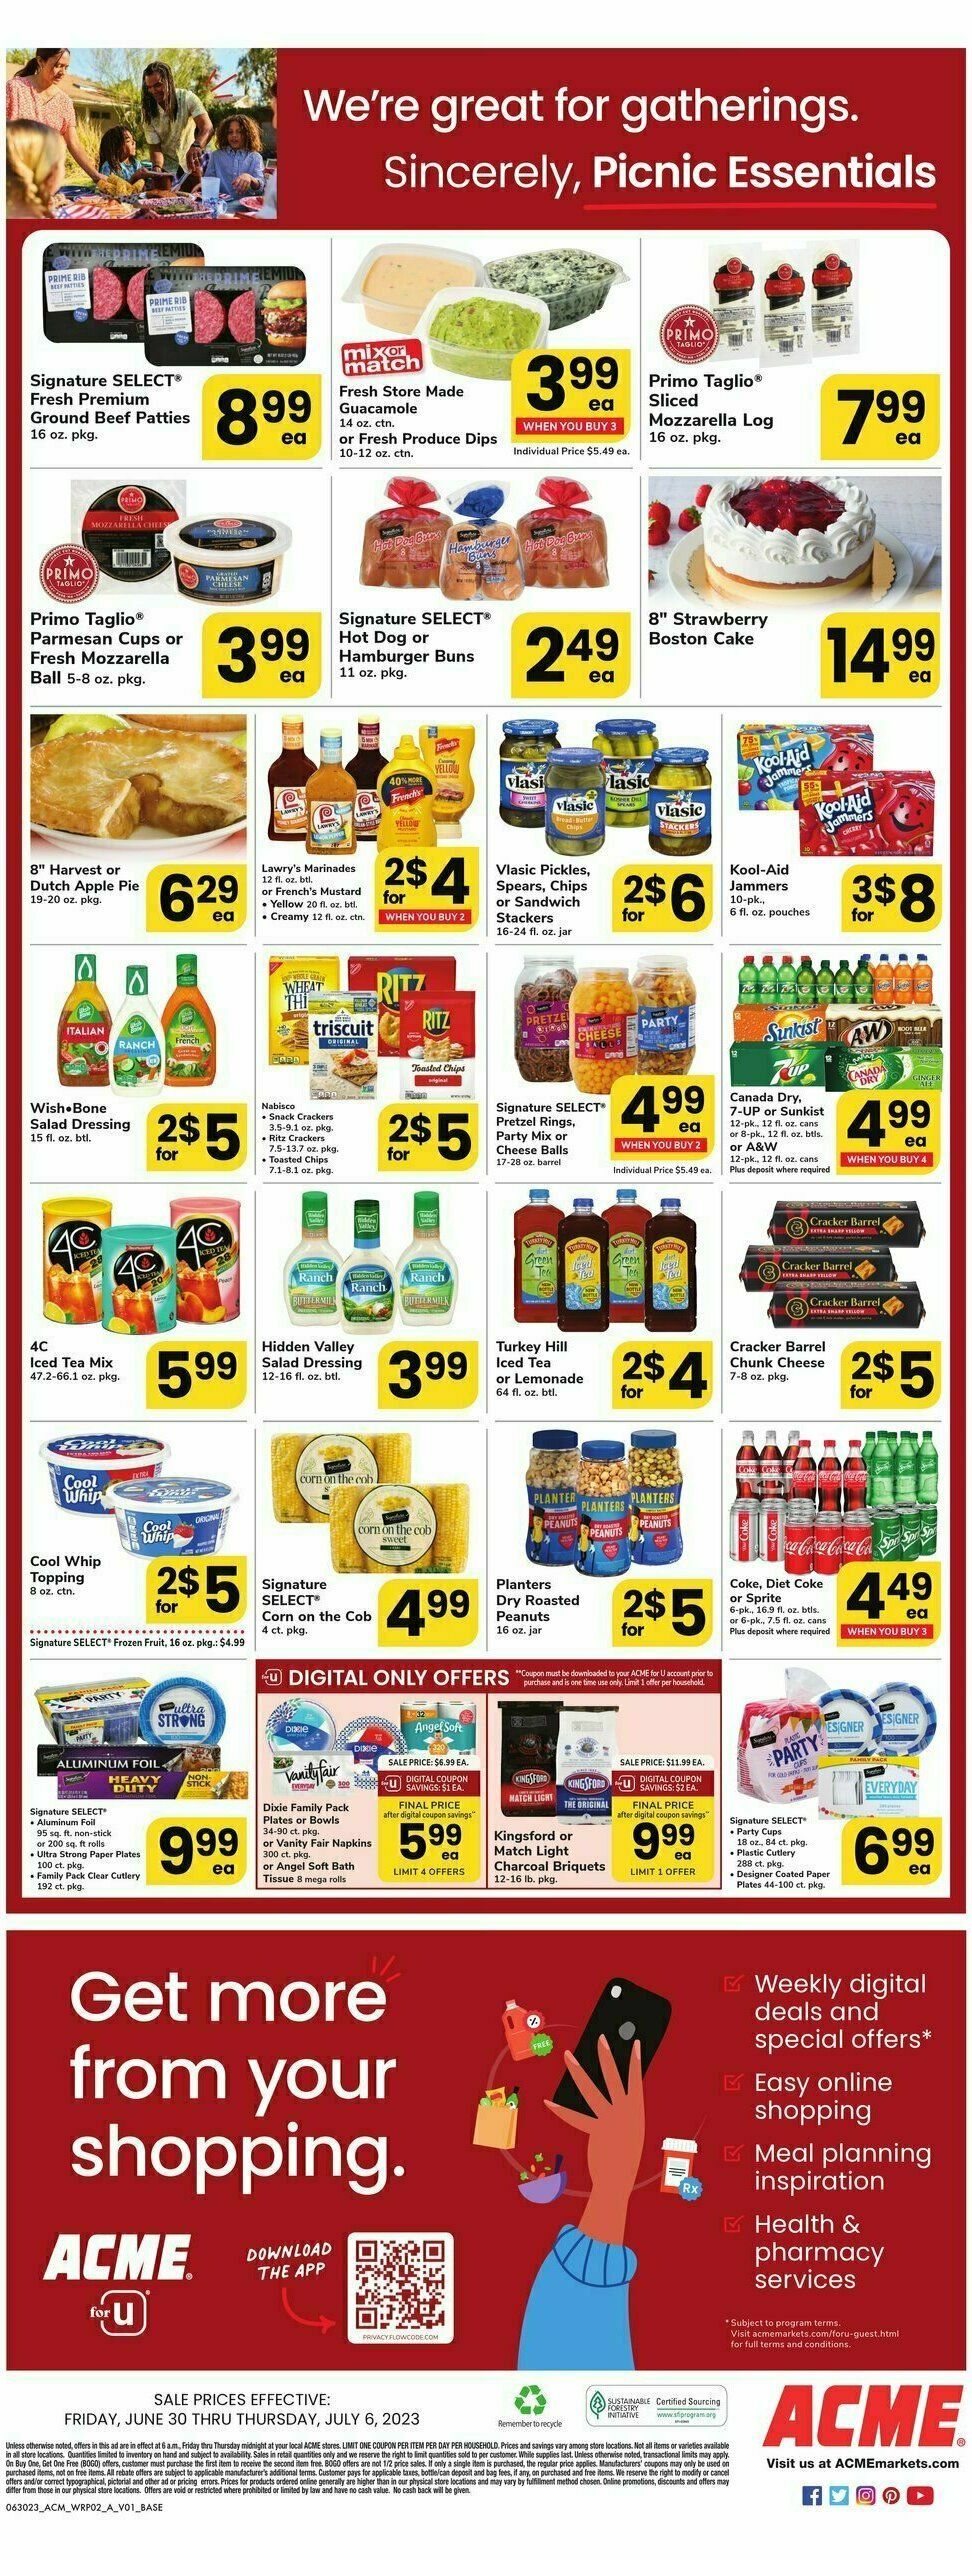 ACME Markets Weekly Ad from June 30